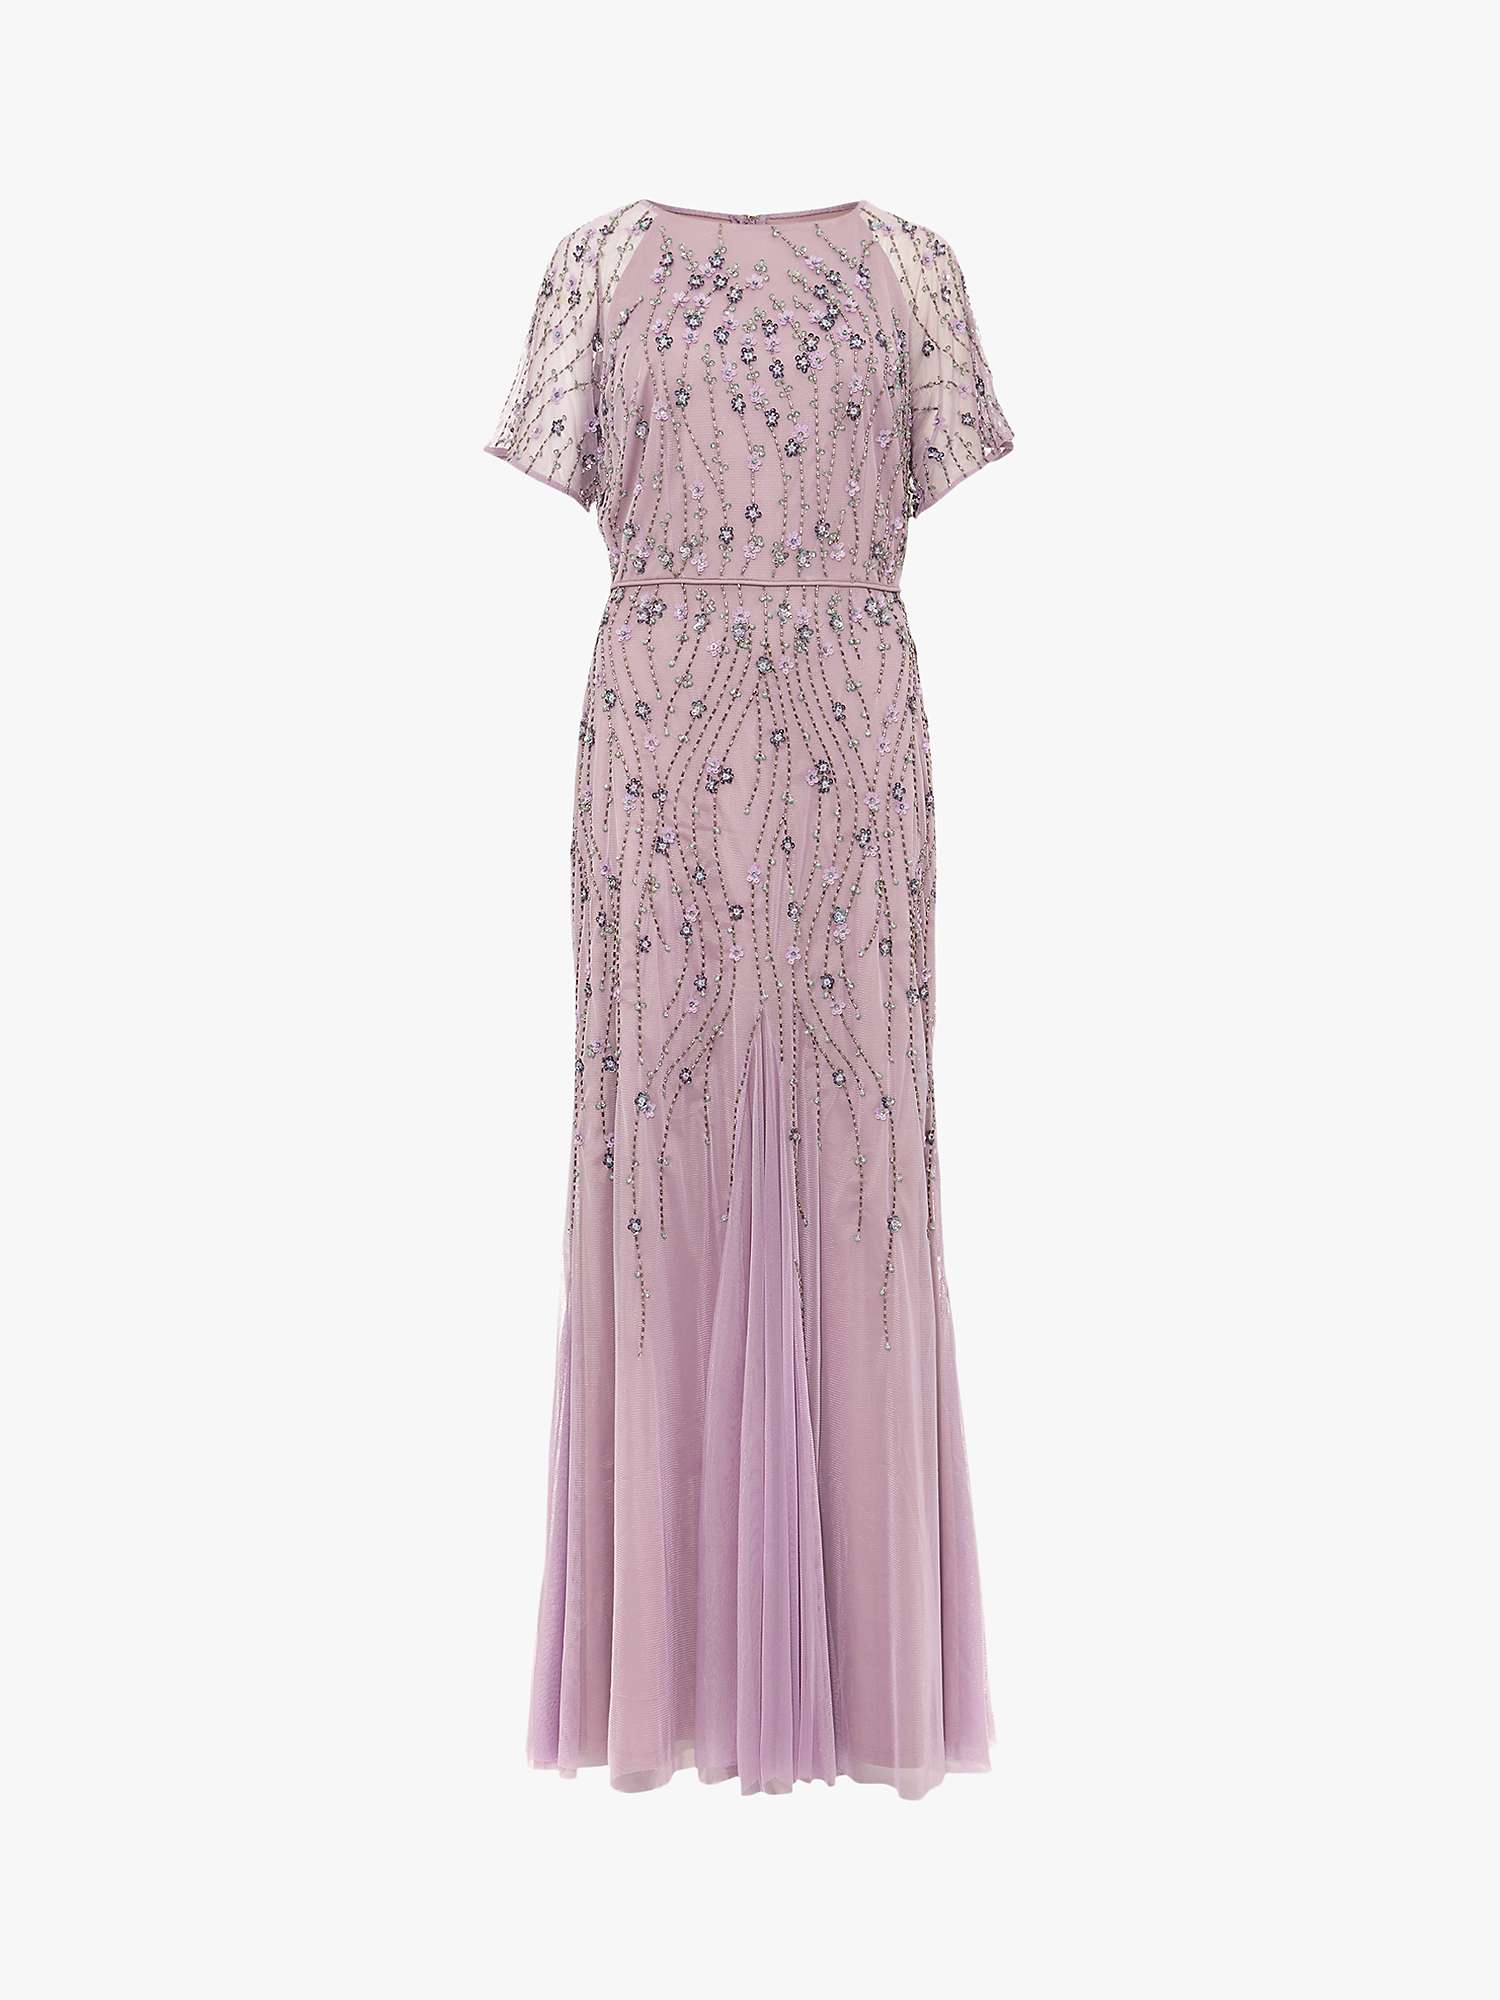 Buy Phase Eight Collection 8 Florisa Squinned Dress, Pale Lavender Online at johnlewis.com